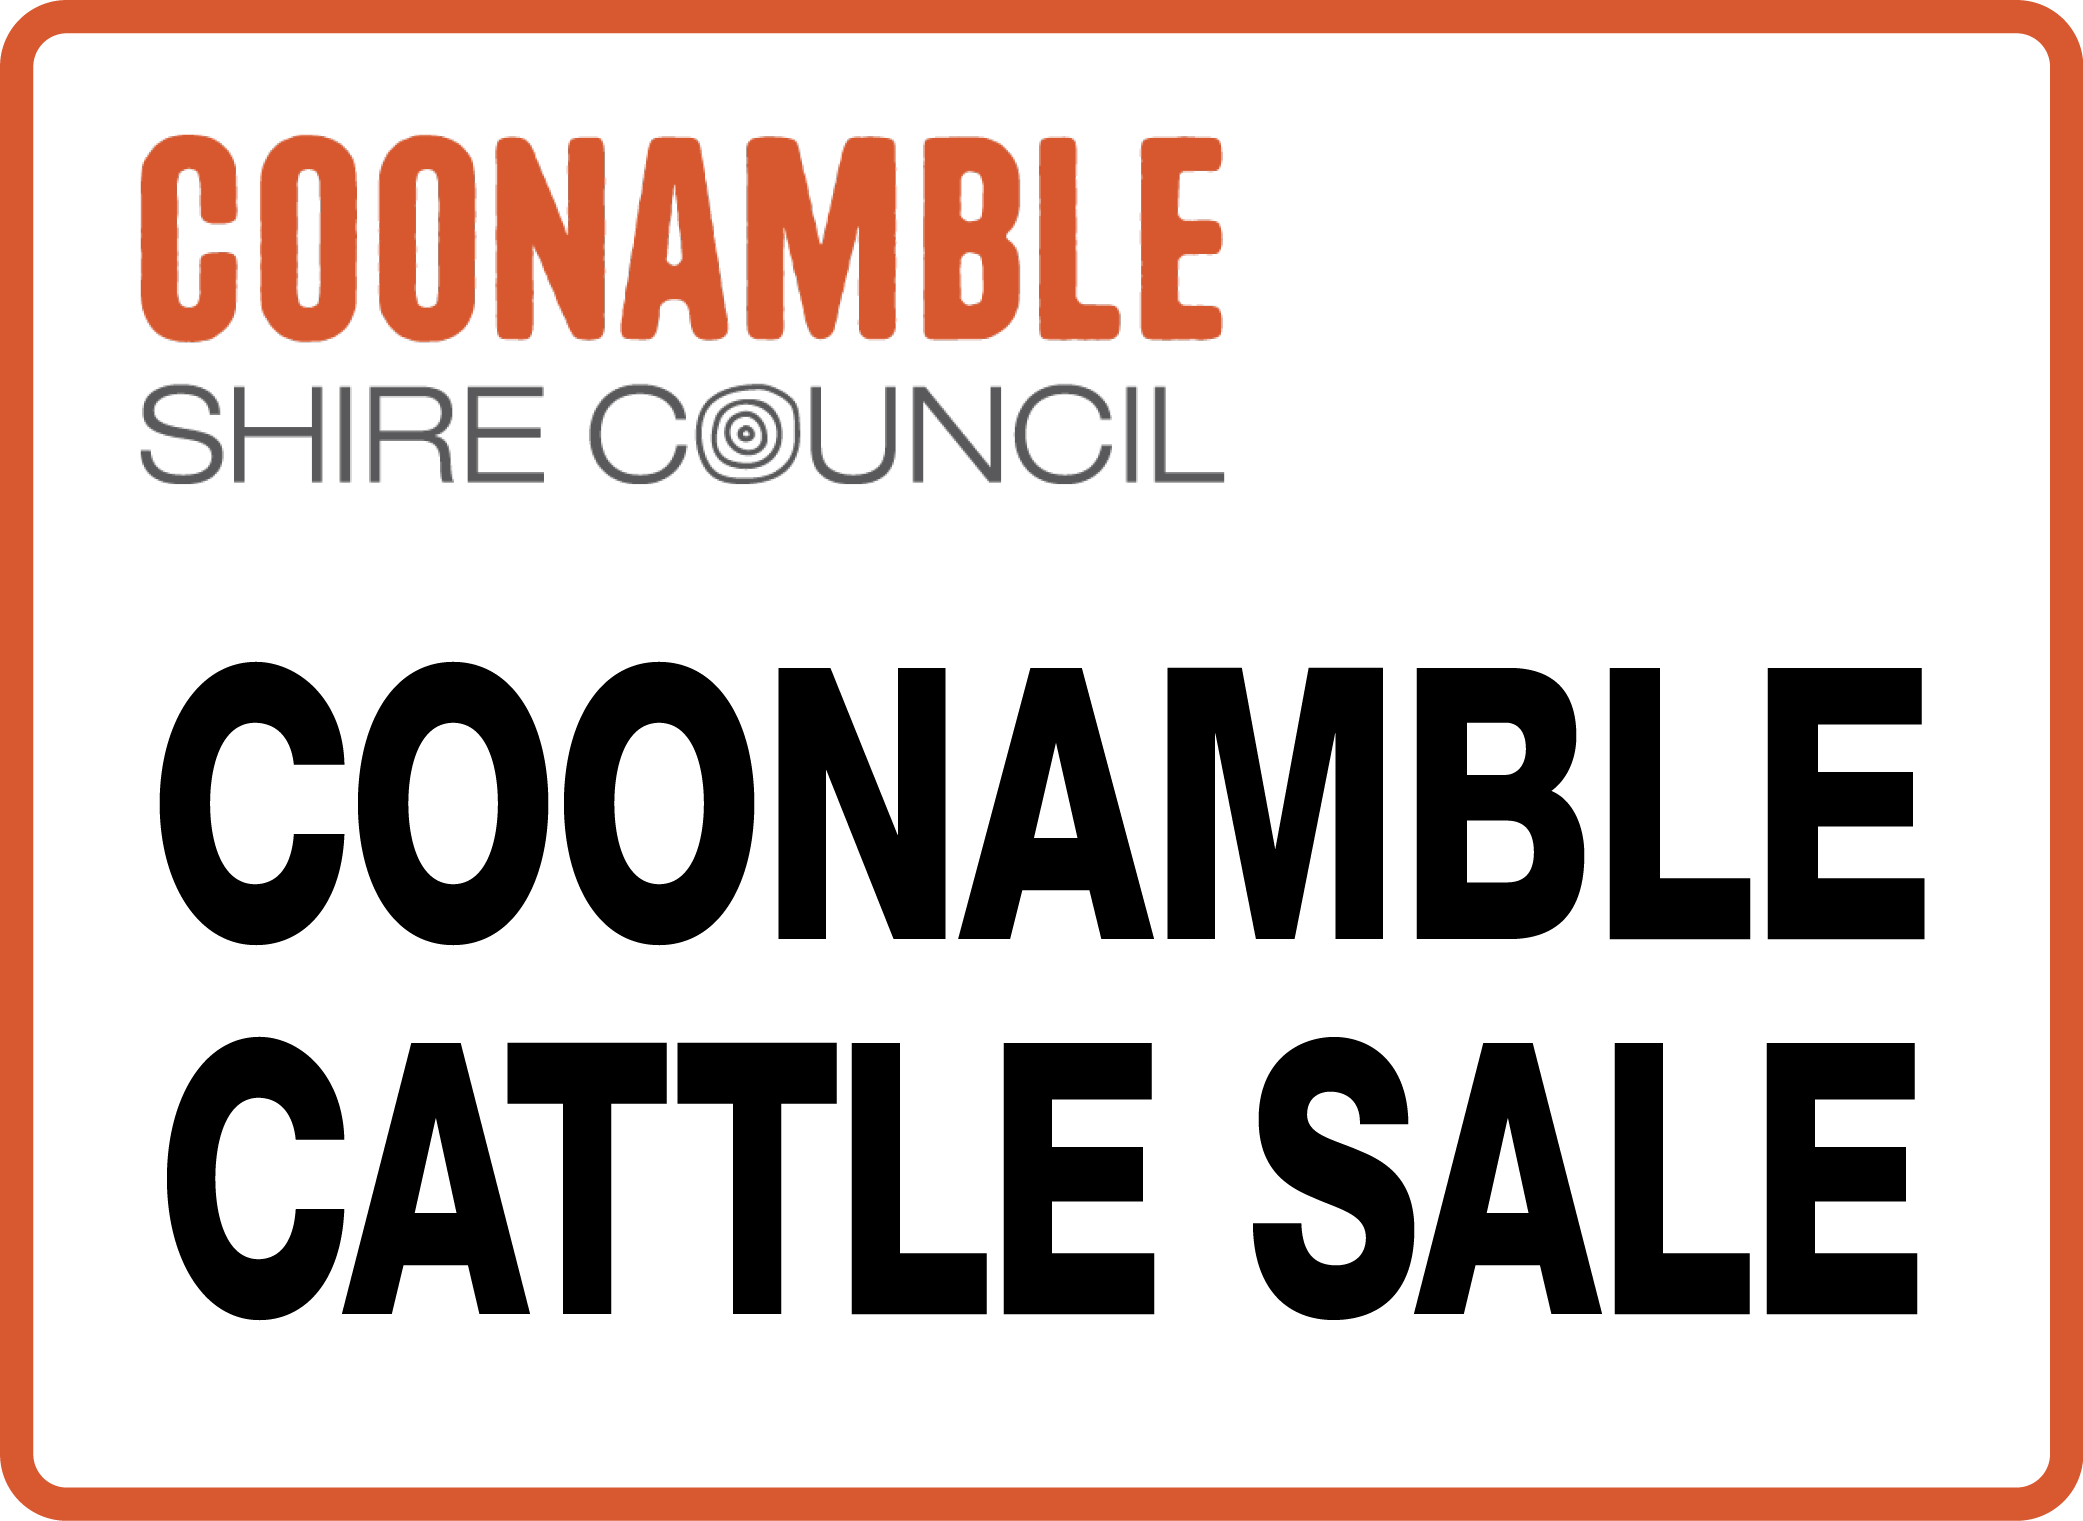 Coonamble Fat Cattle Sale and Coonamble Store Cattle Sale